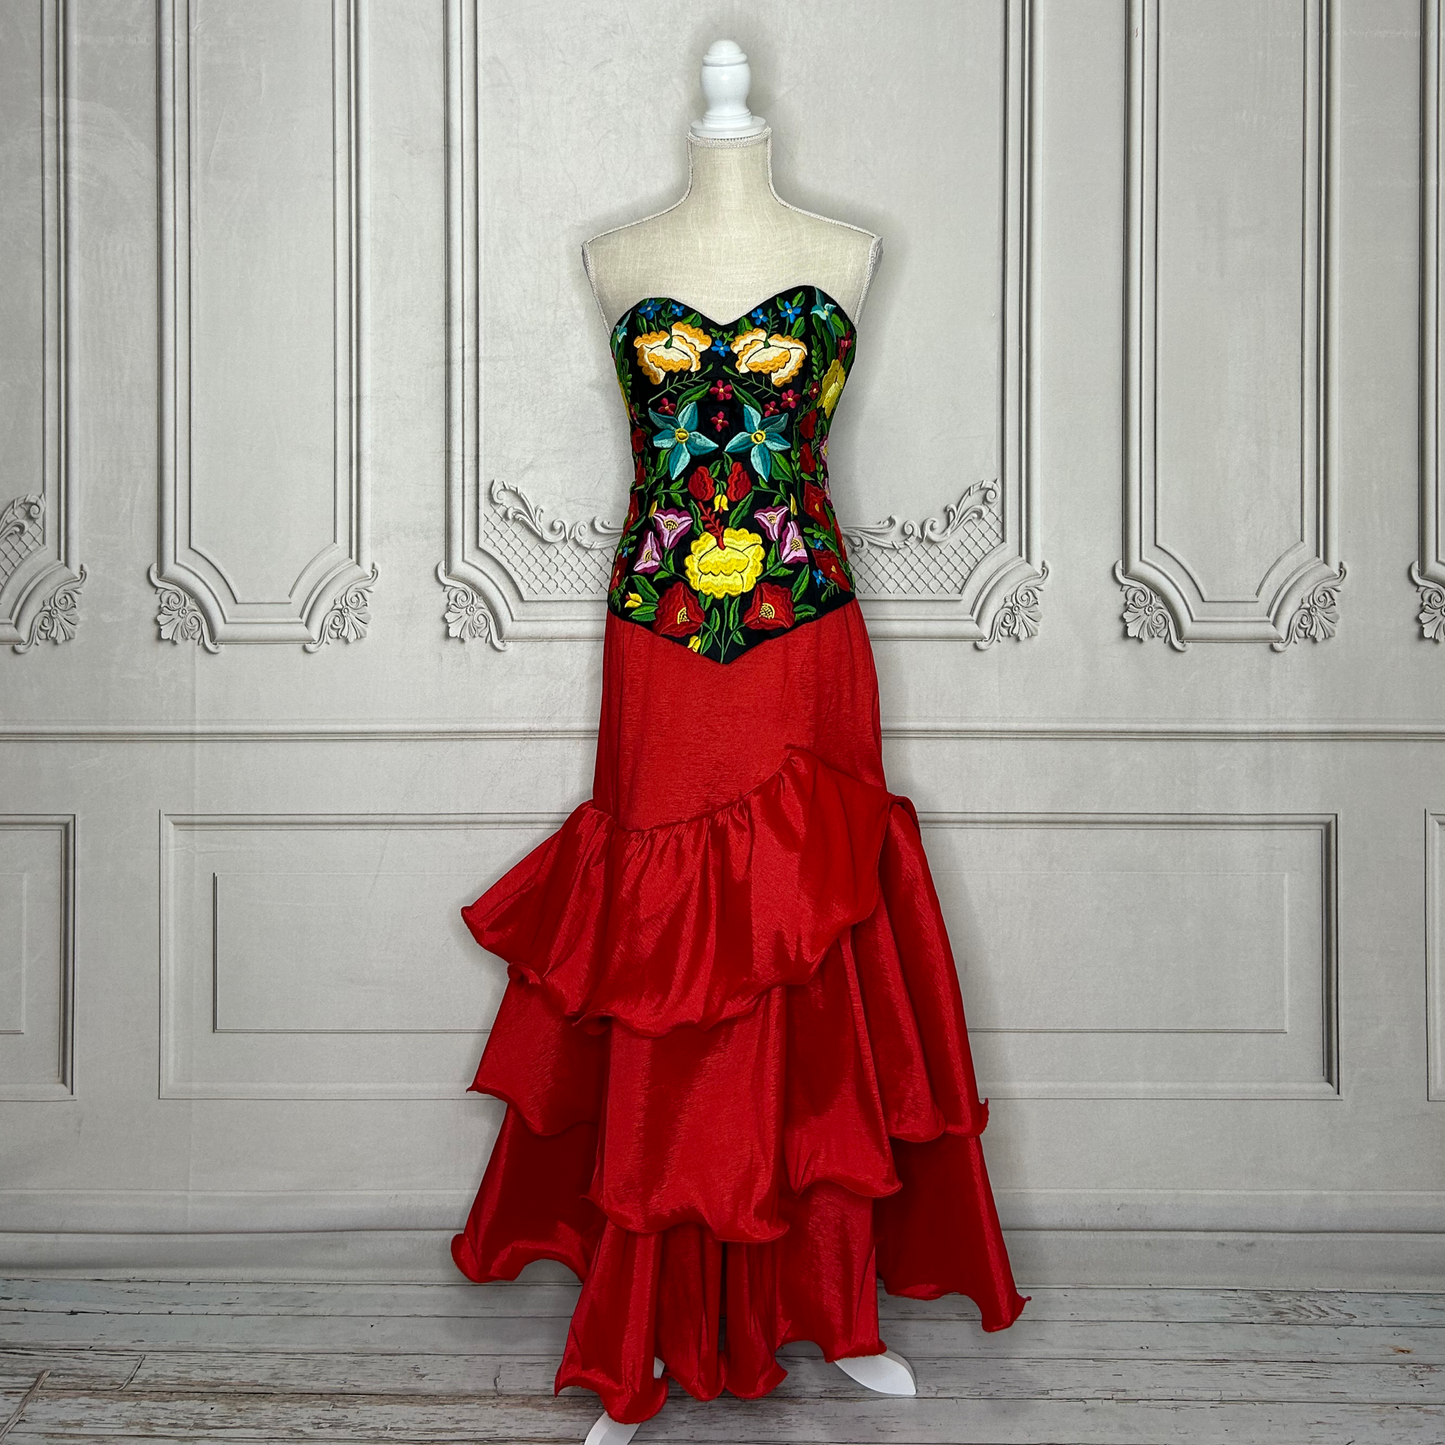 Embroidered Mexican Formal Corset and Skirt - Ruffled Mermaid